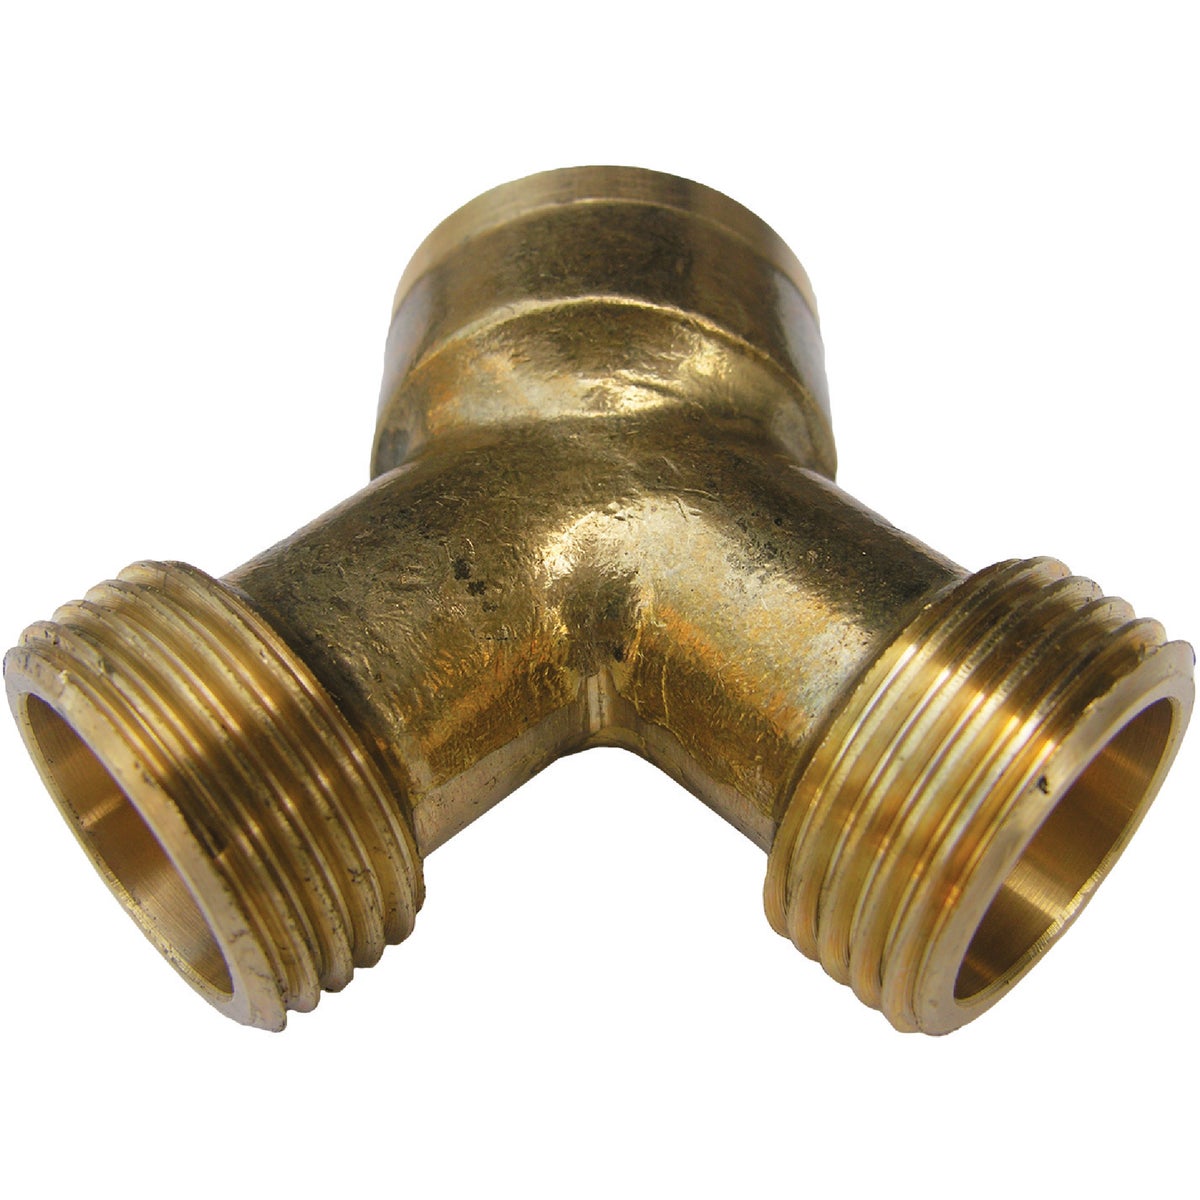 Lasco 3/4 In. MNT x 3/4 In. MNH x 3/4 In. FNH Brass Wye Hose Connector